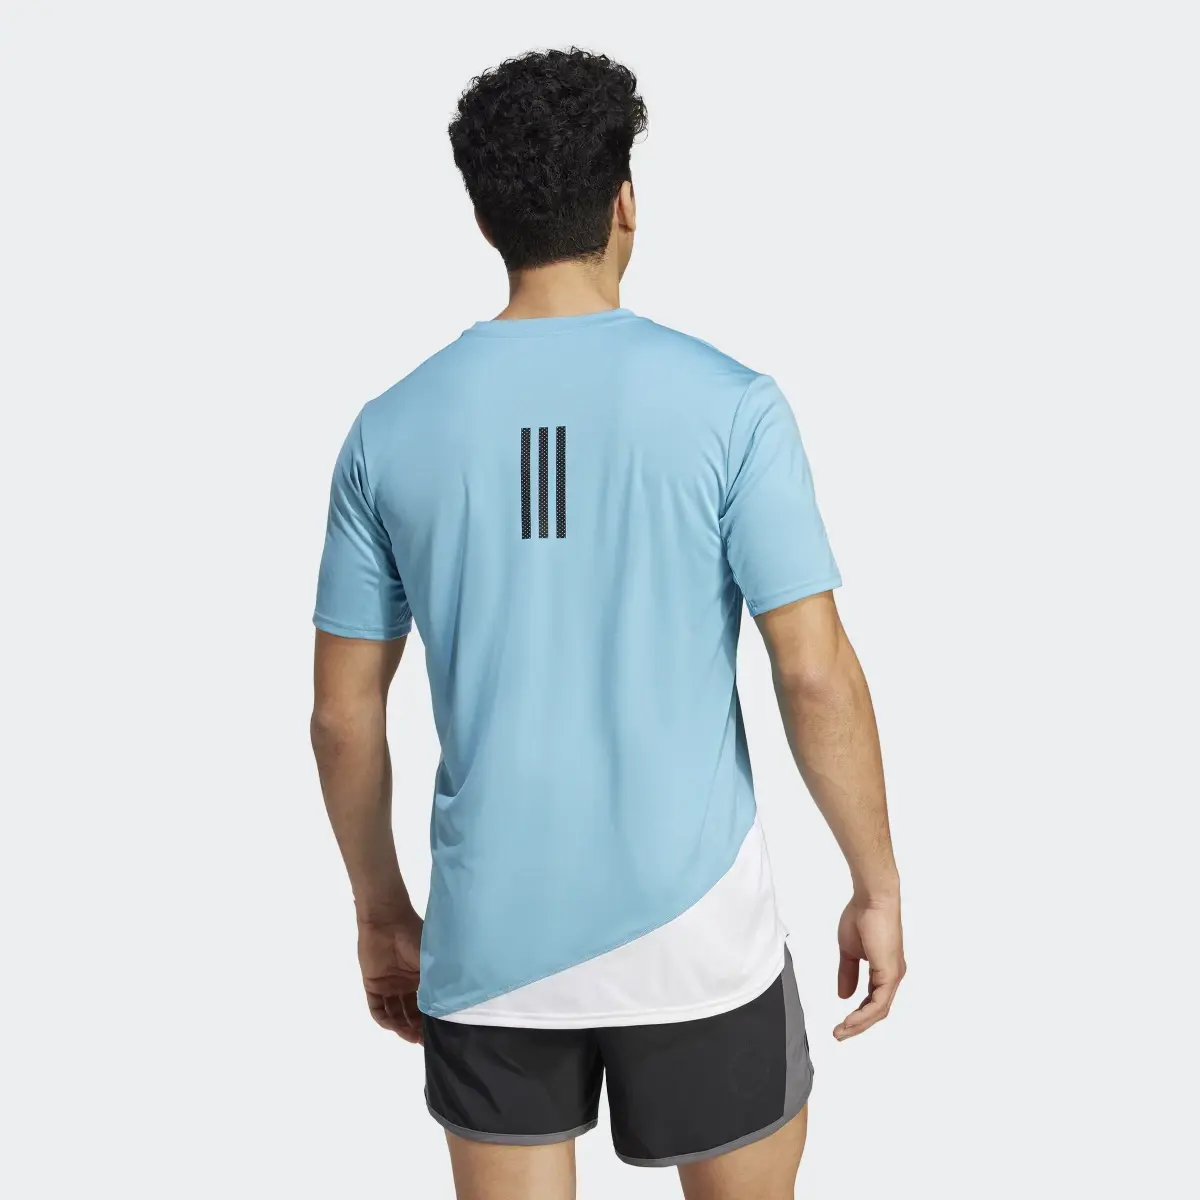 Adidas Made to be Remade Running Tee. 3